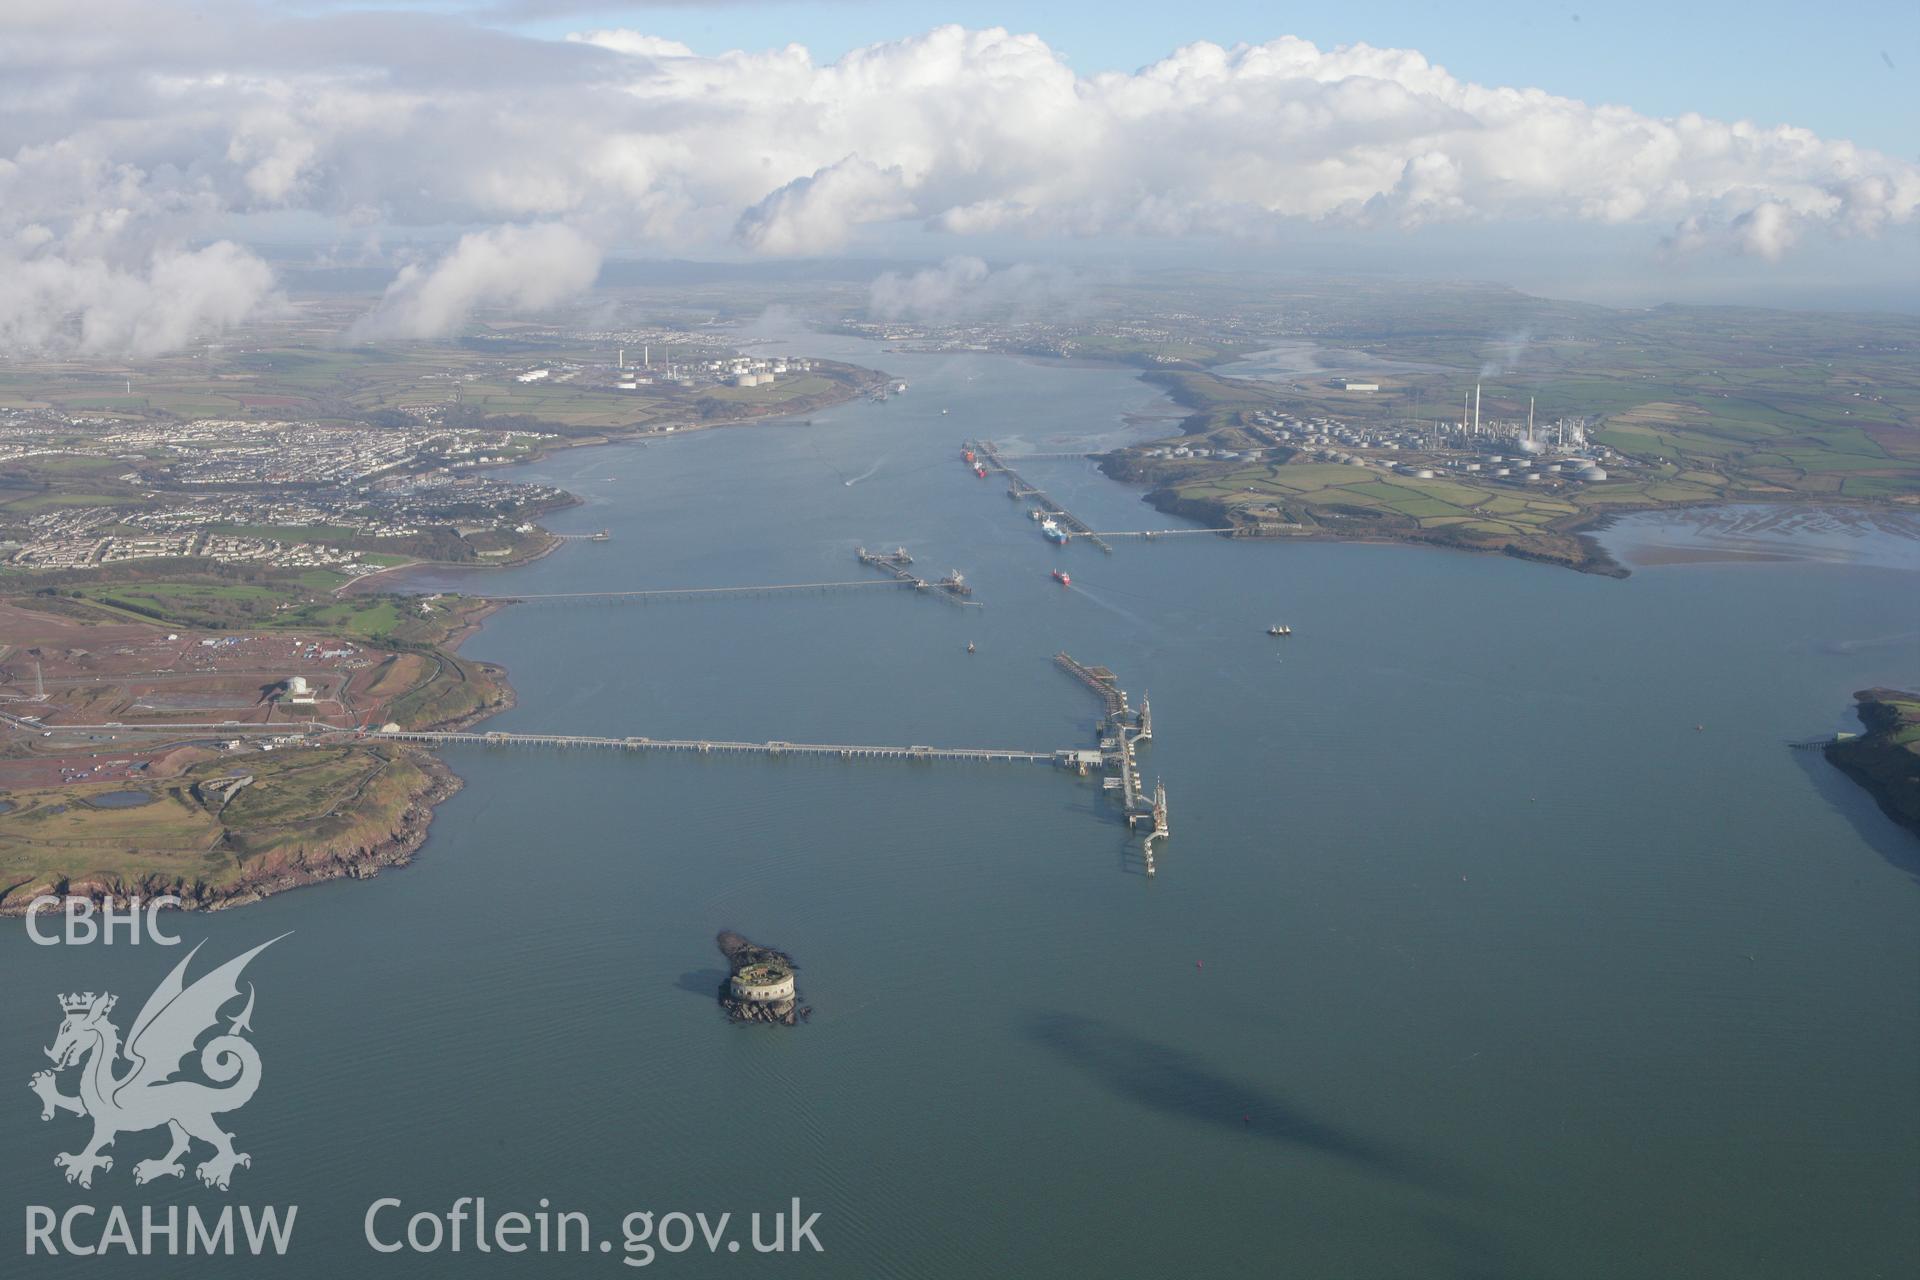 RCAHMW colour oblique photograph of Milford Haven waterway. Taken by Toby Driver on 11/02/2009.